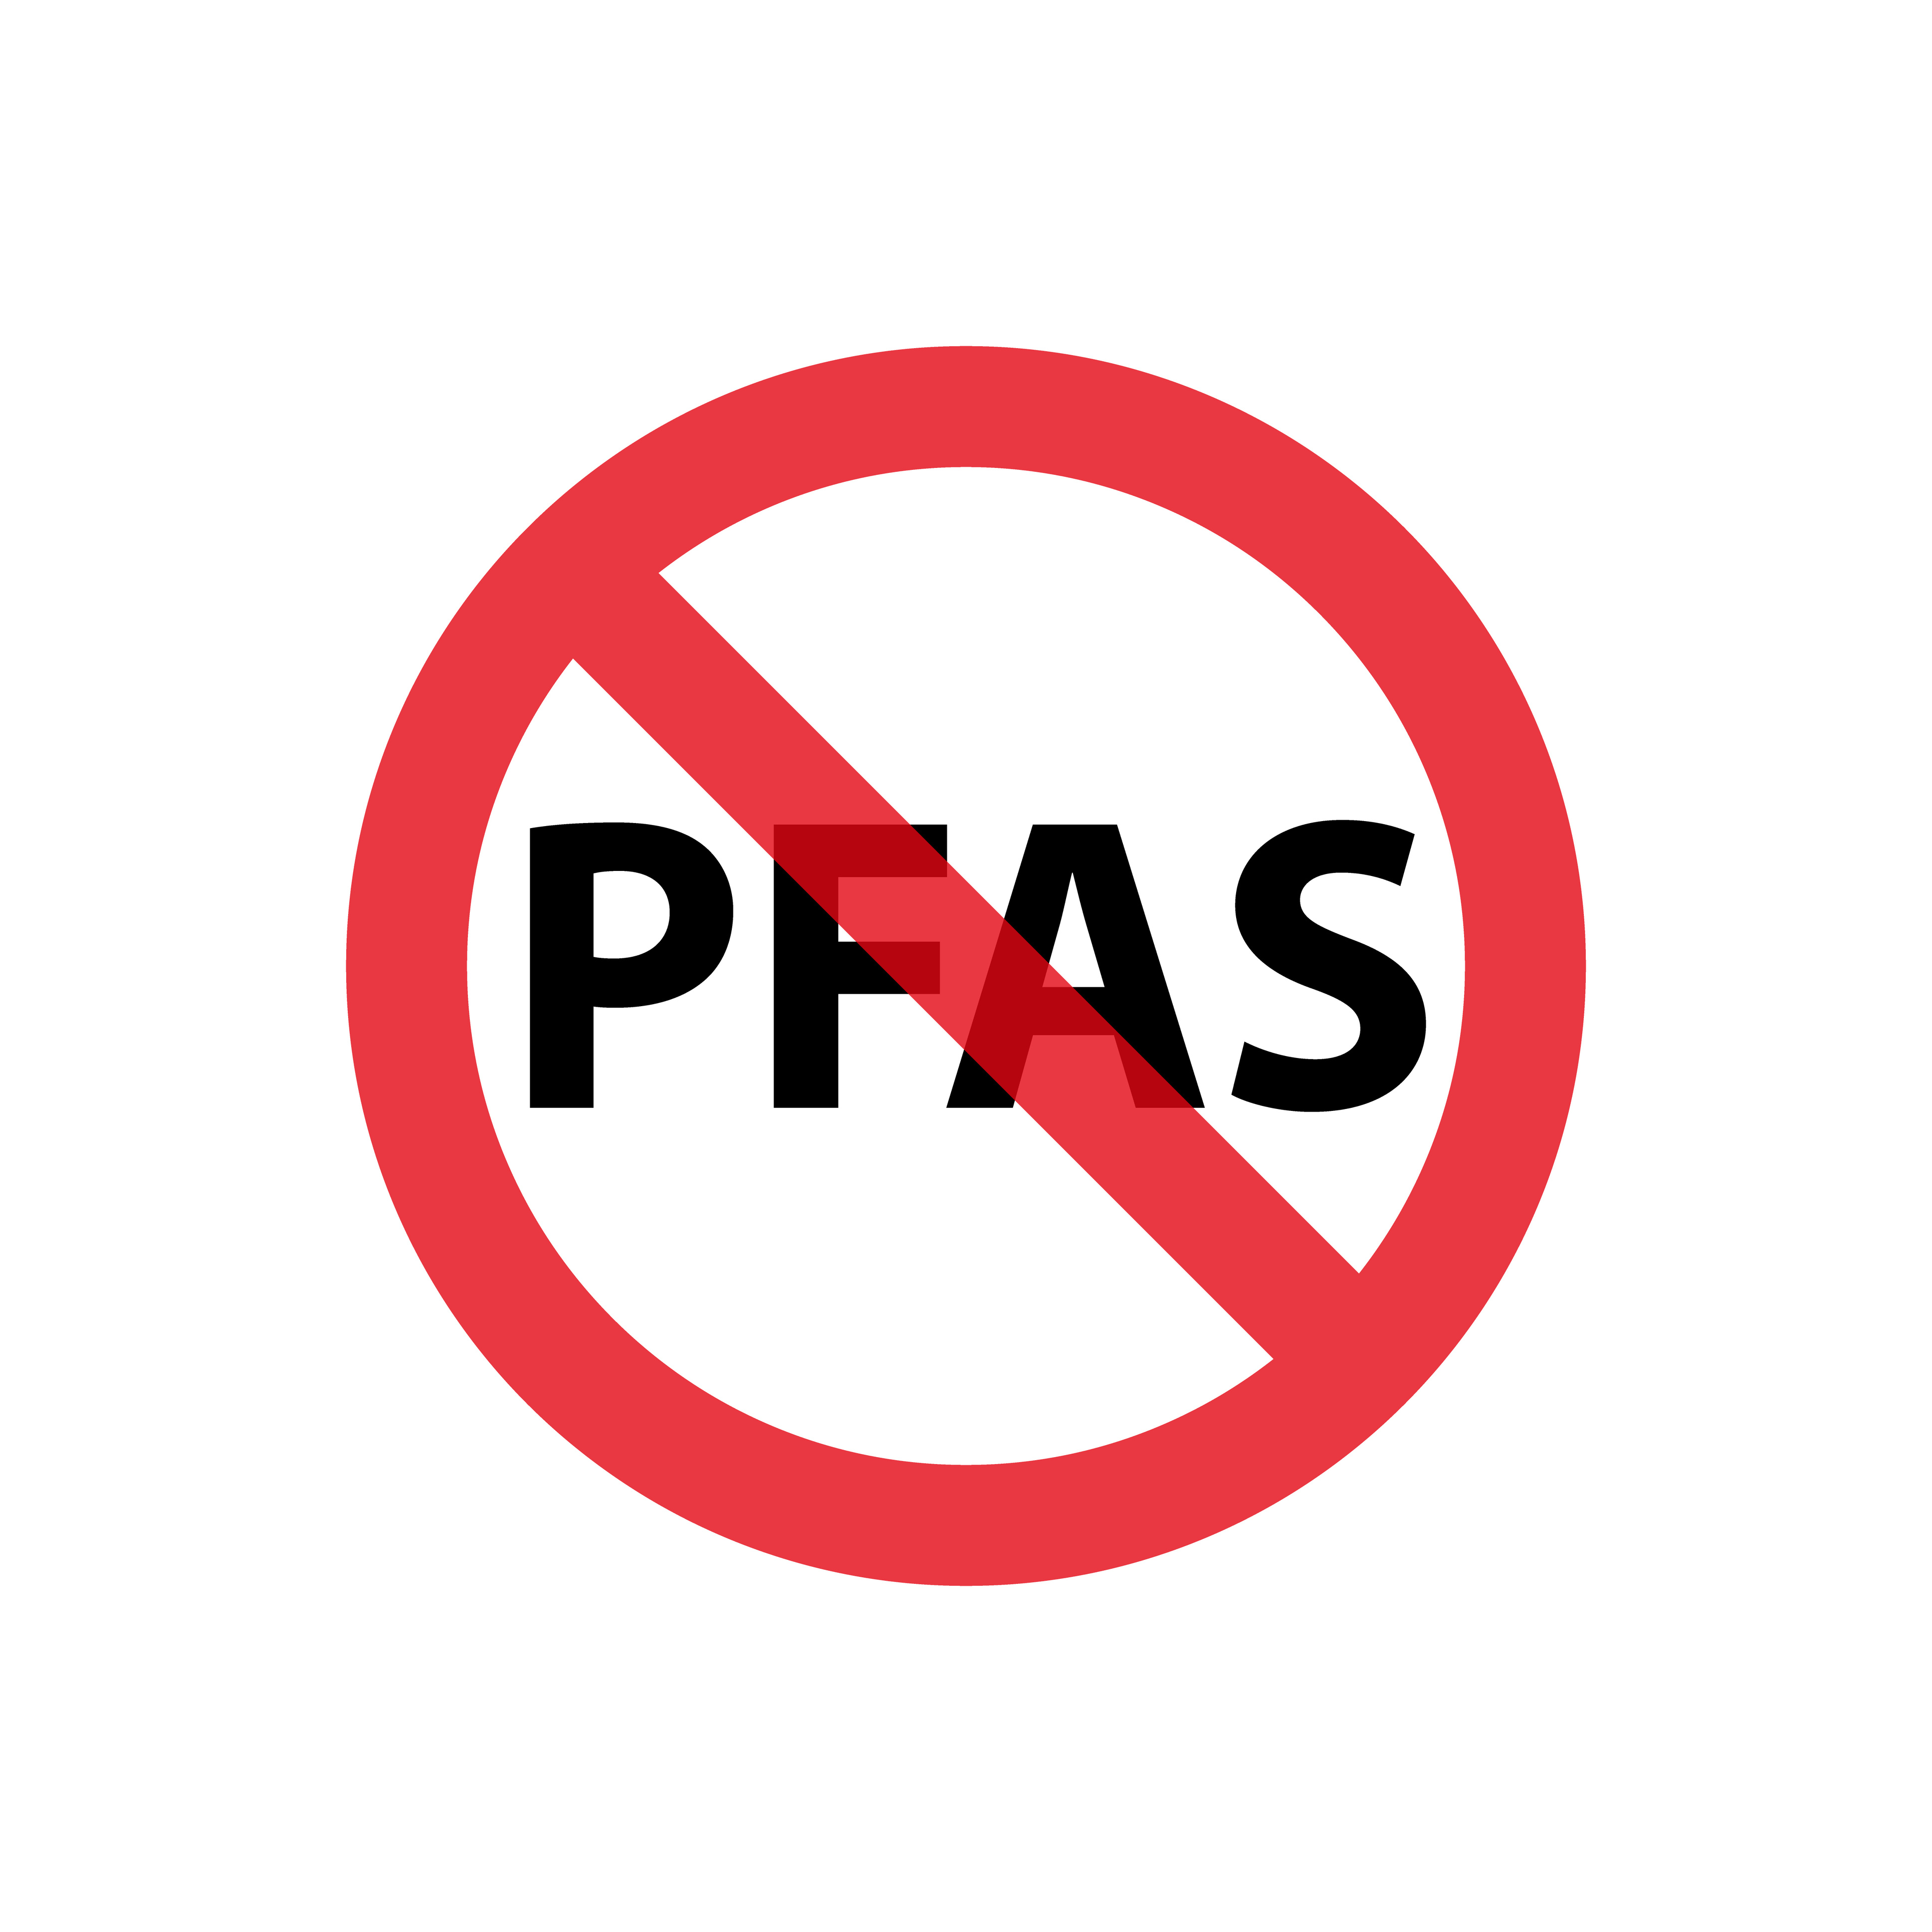 The universal no sign with pfas behind it